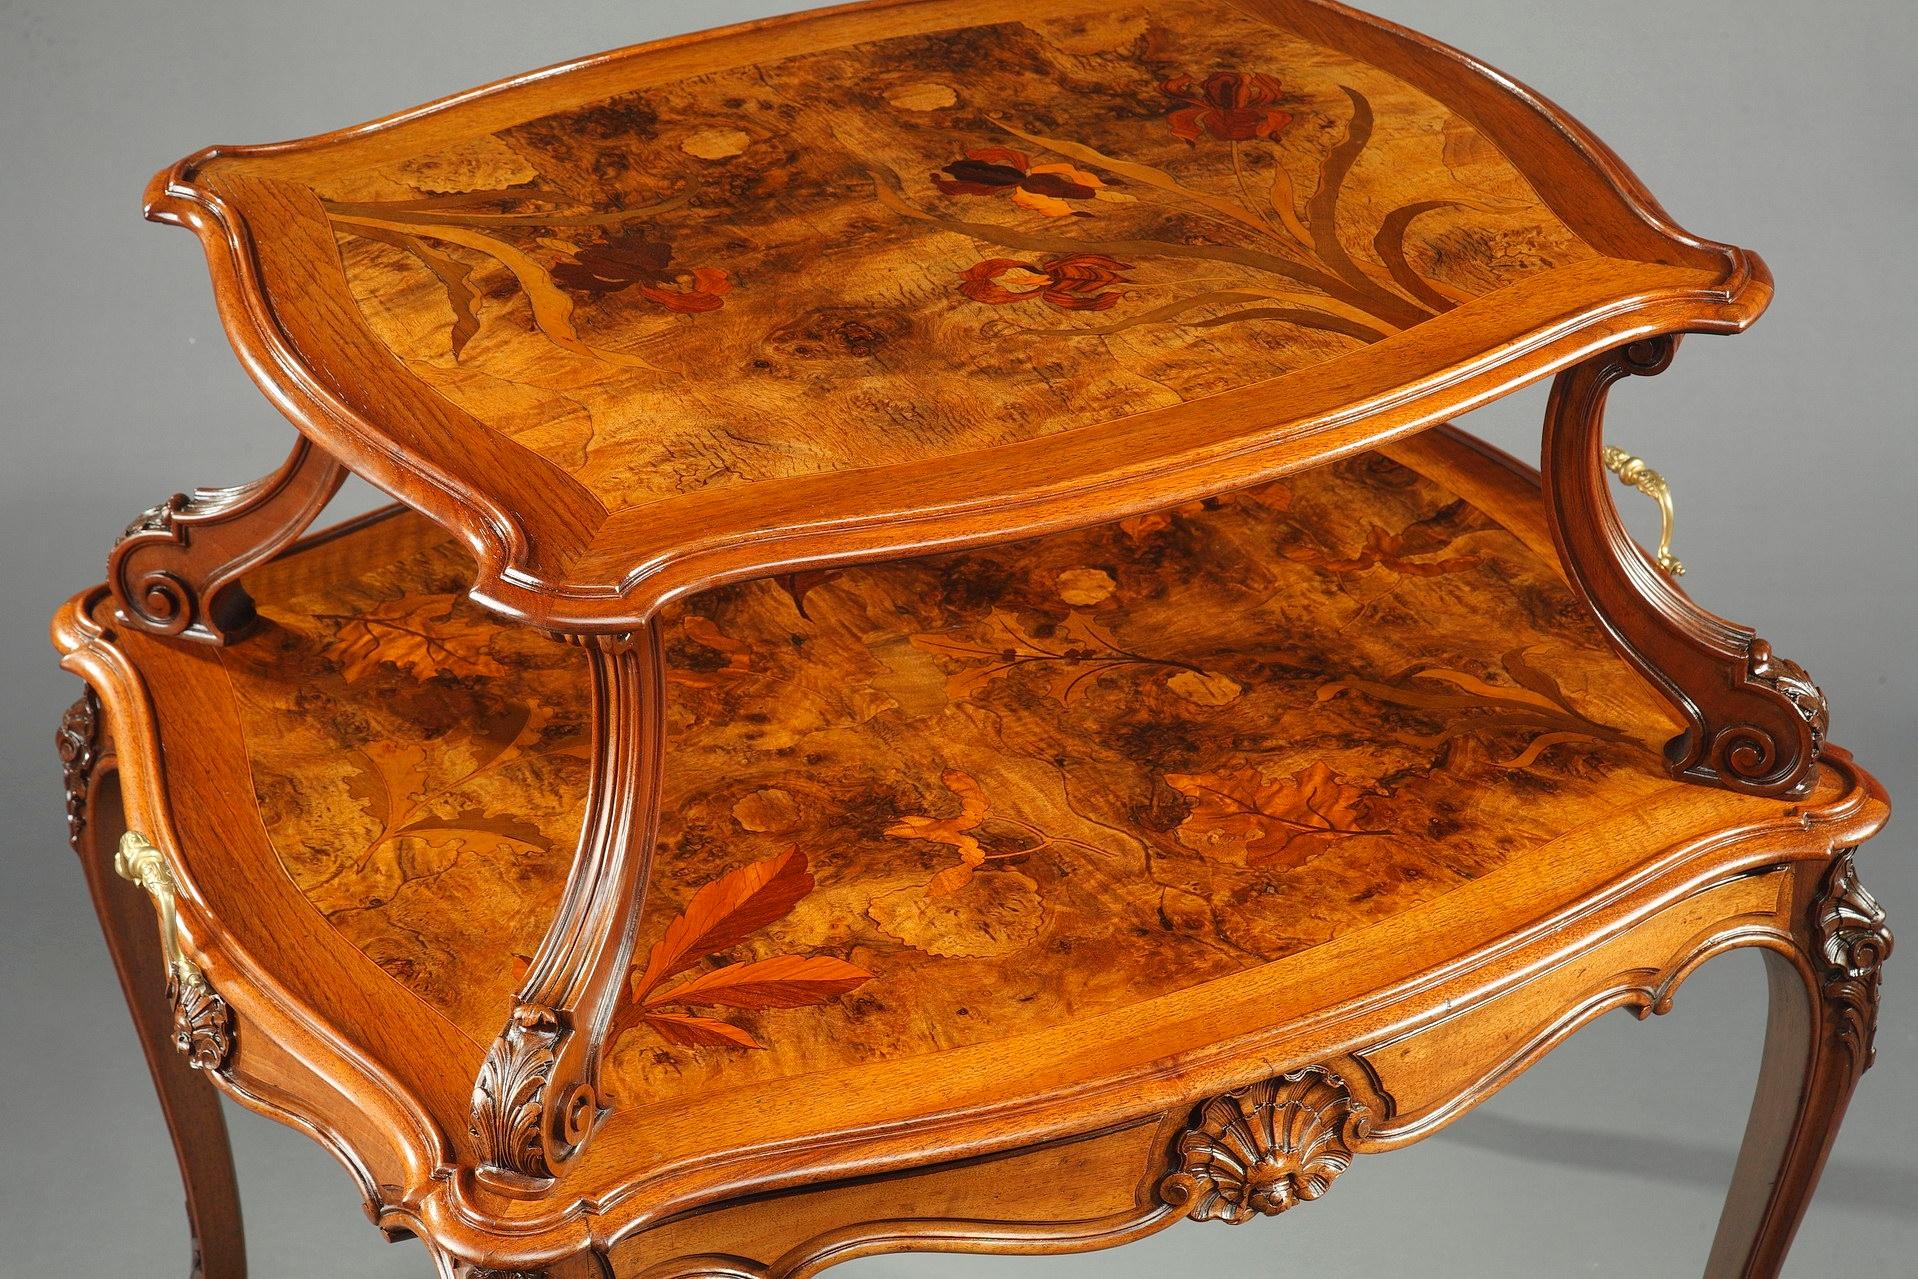 Wooden Tea Table with Polychrome Marquetry Decoration, Art Nouveau Period 5